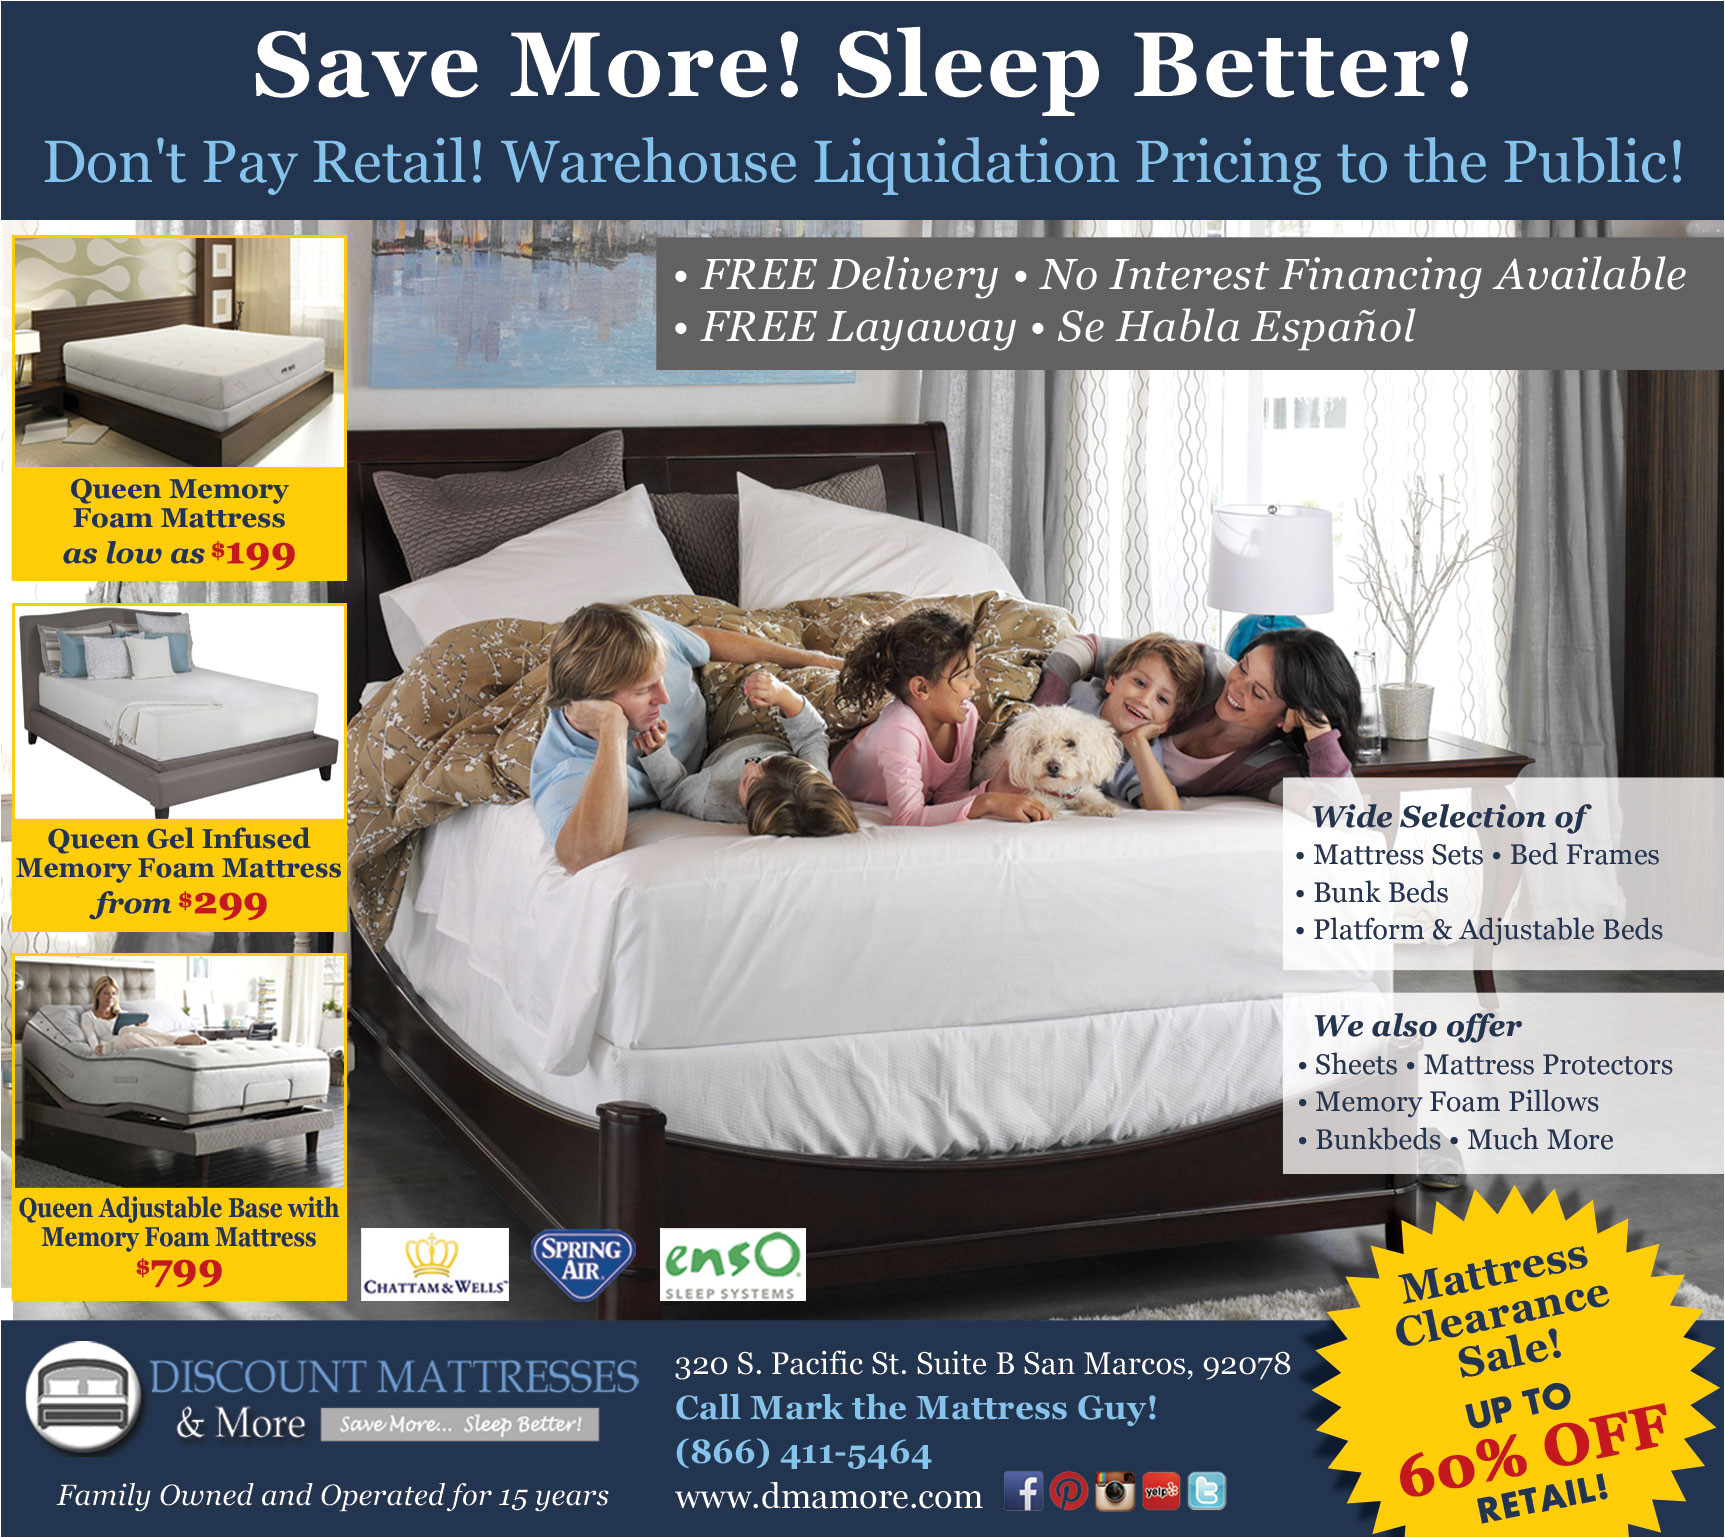 Chattam and Wells King Size Mattress Prices Home Furnishings Google